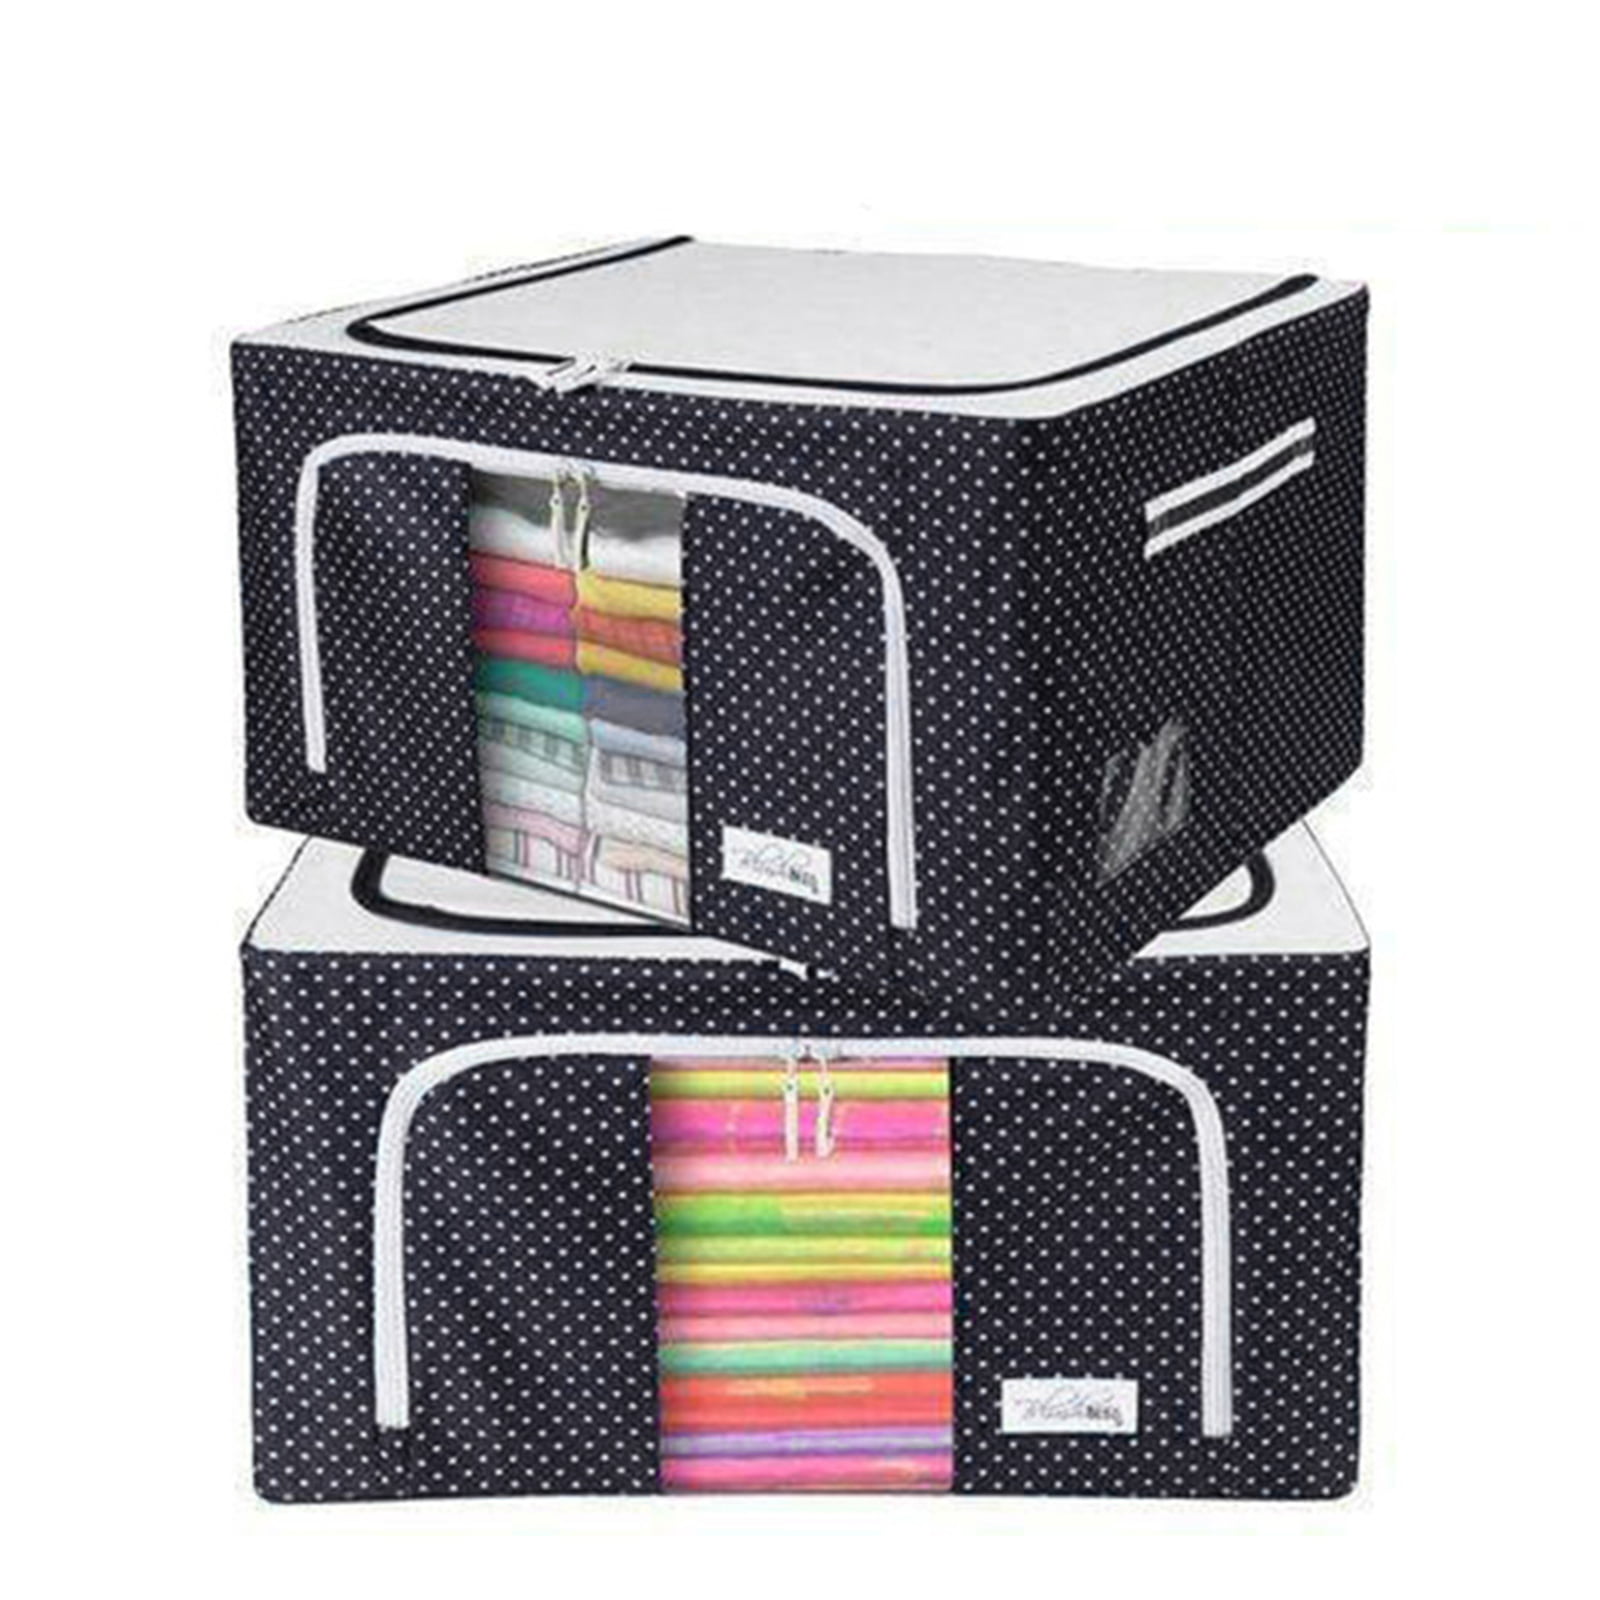 LivingBox Foldable Storage Containers Fabric See-Through Window Oxford Fabric Storage Bins Household Home Organizers 3 Pack